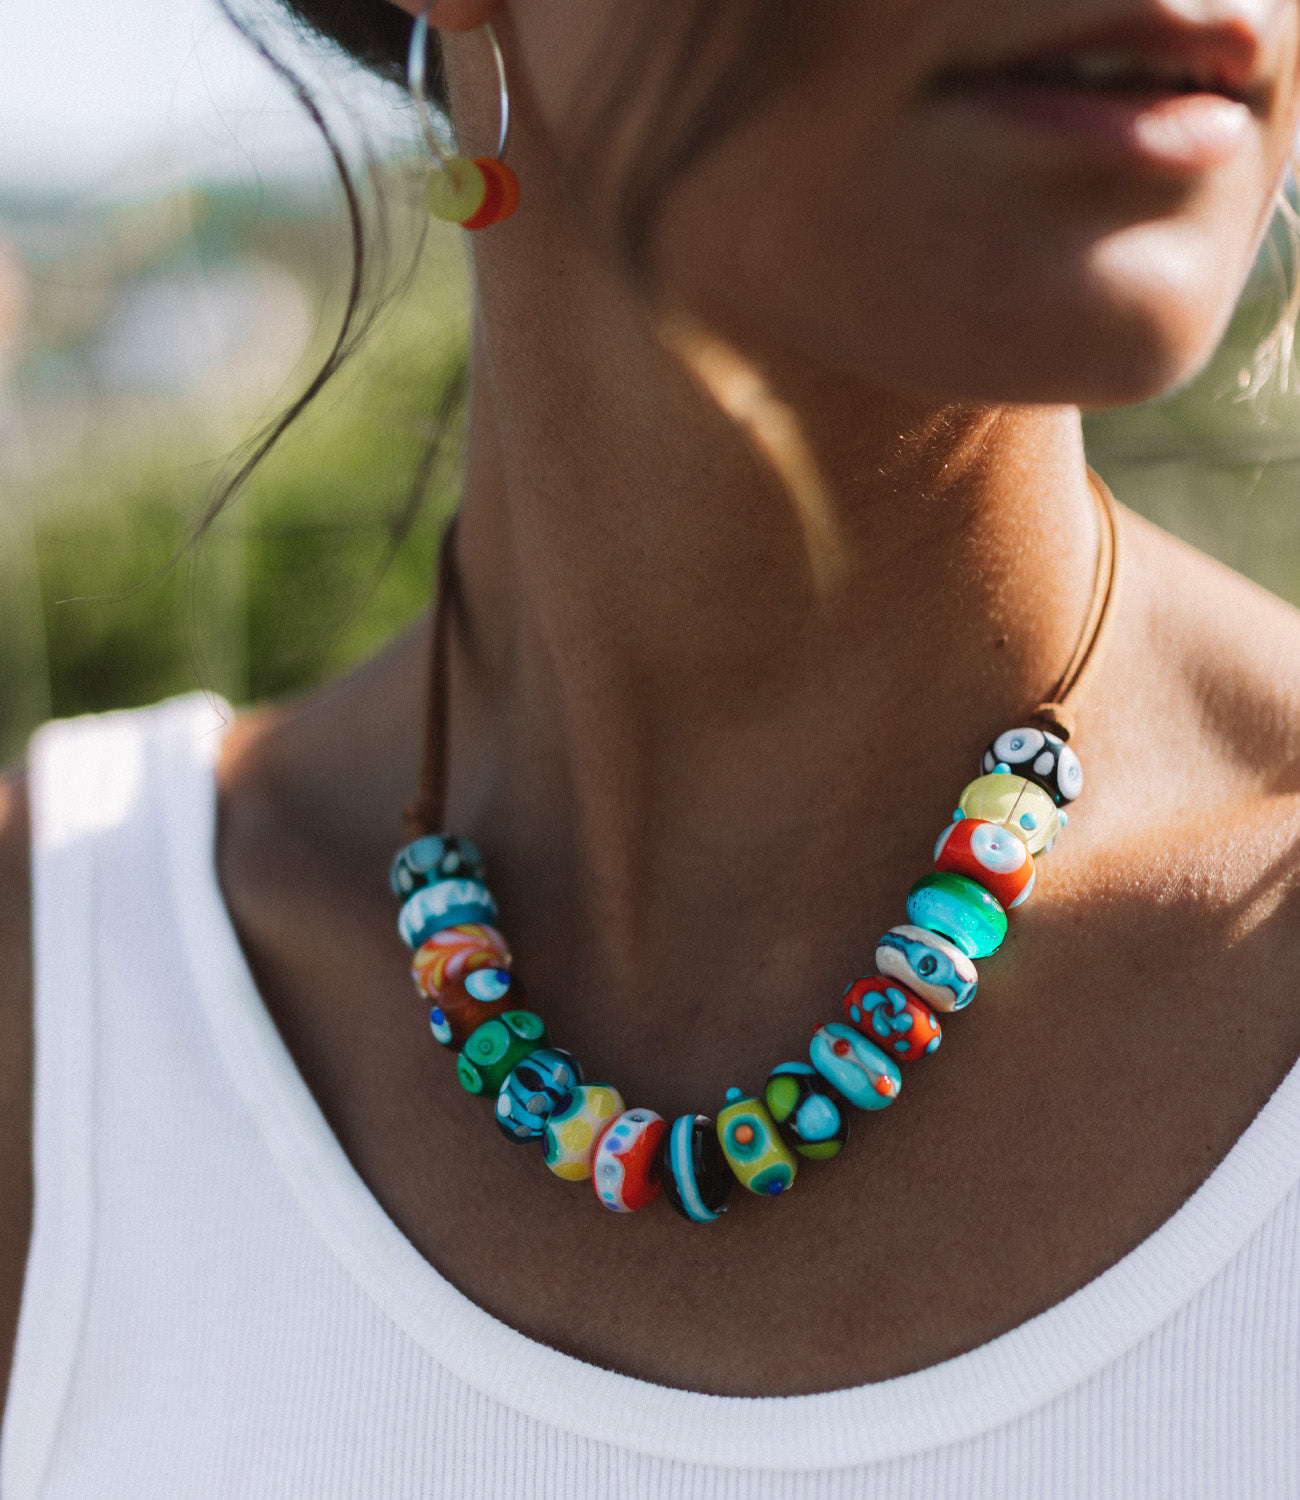 Multicolour glass beads strung on cord necklace worn by skater girl at the beach.